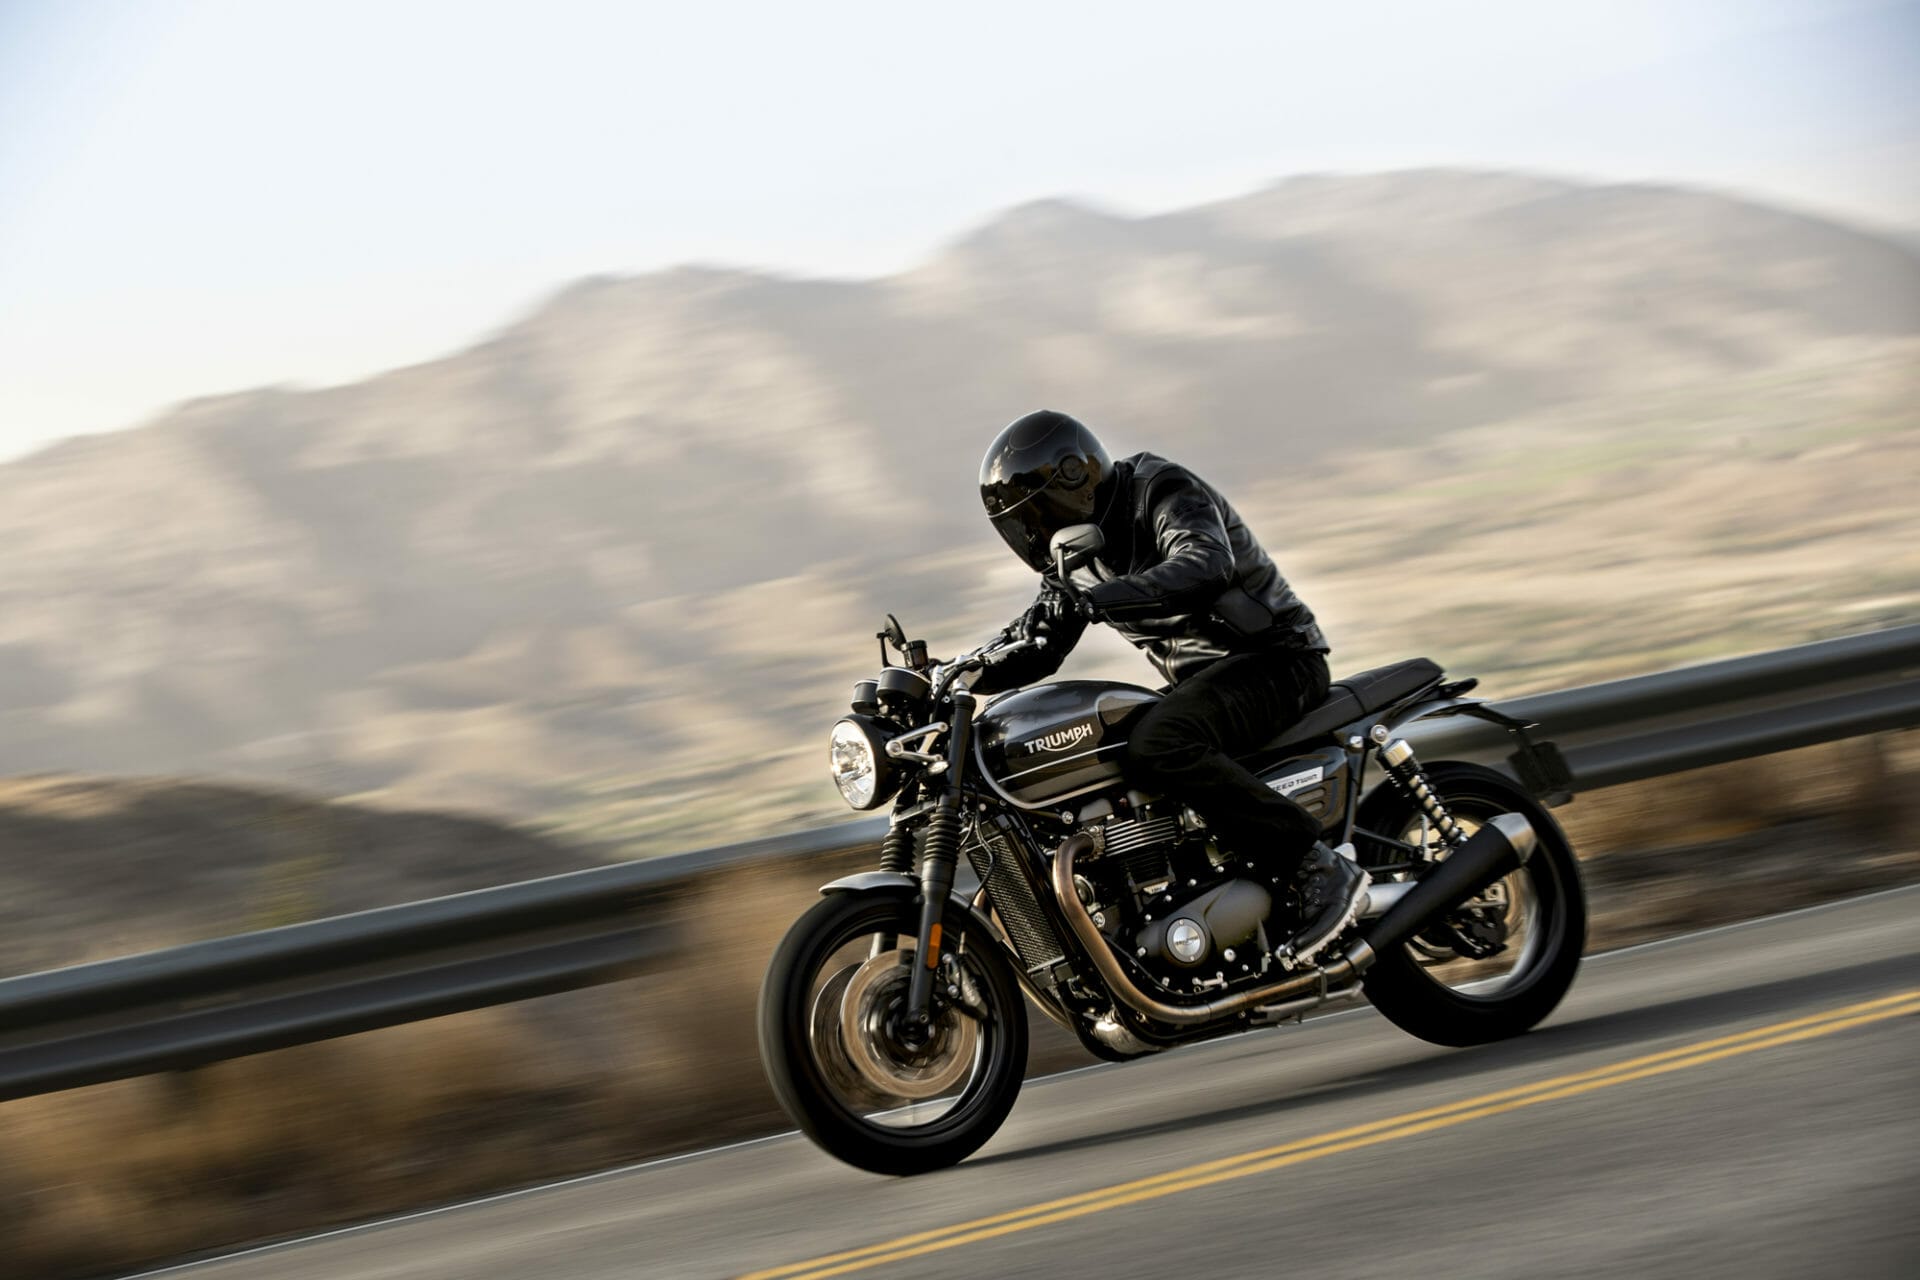 Recall: Various Thruxton models and Speed Twin affected
- also in the APP MOTORCYCLE NEWS